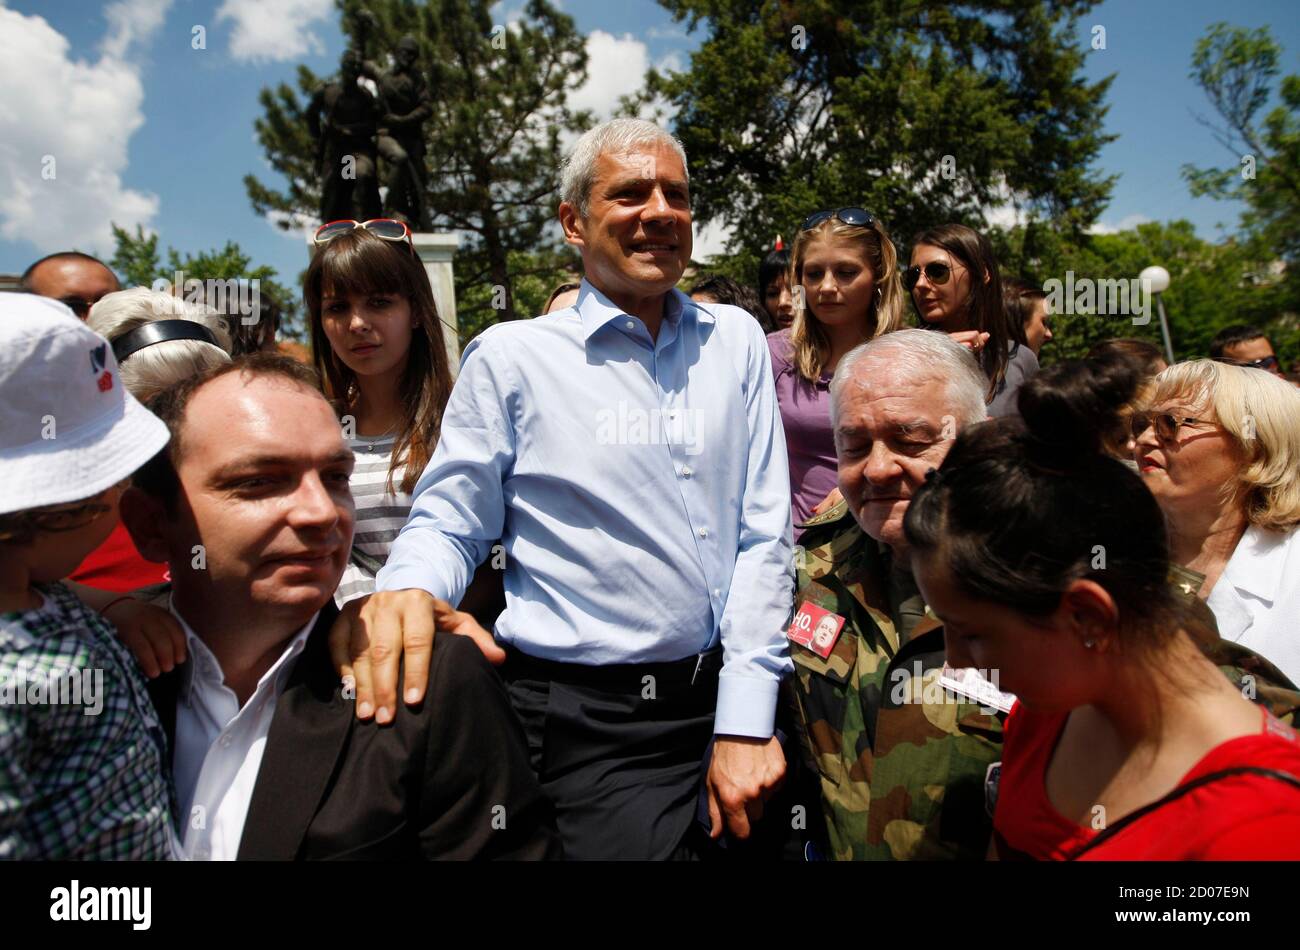 Former Serbian President and Democratic Party leader Boris Tadic reacts as  he is surrounded by supporters during a campaign rally in the southern town  of Prokuplje May 10, 2012. Serbia's main opposition